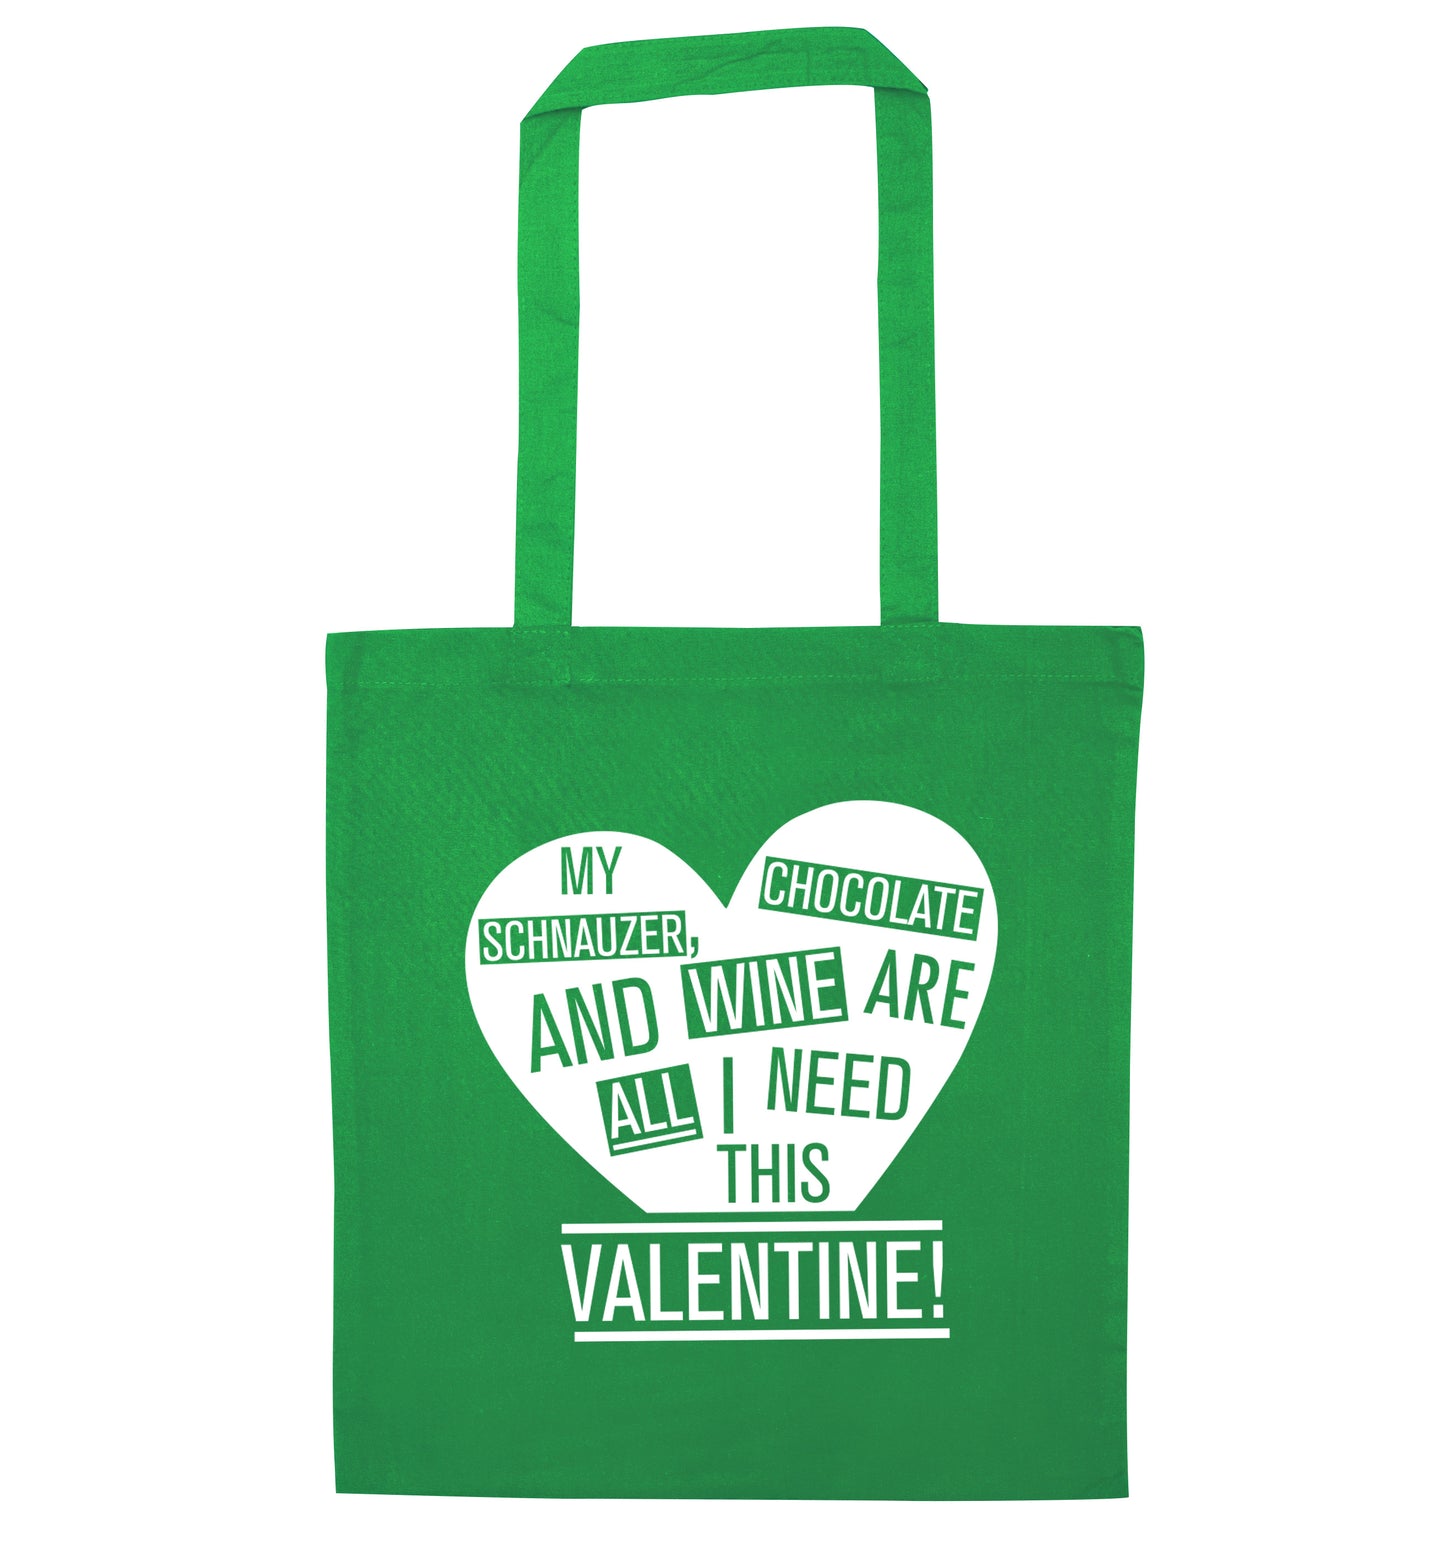 My schnauzer, chocolate and wine are all I need this valentine! green tote bag